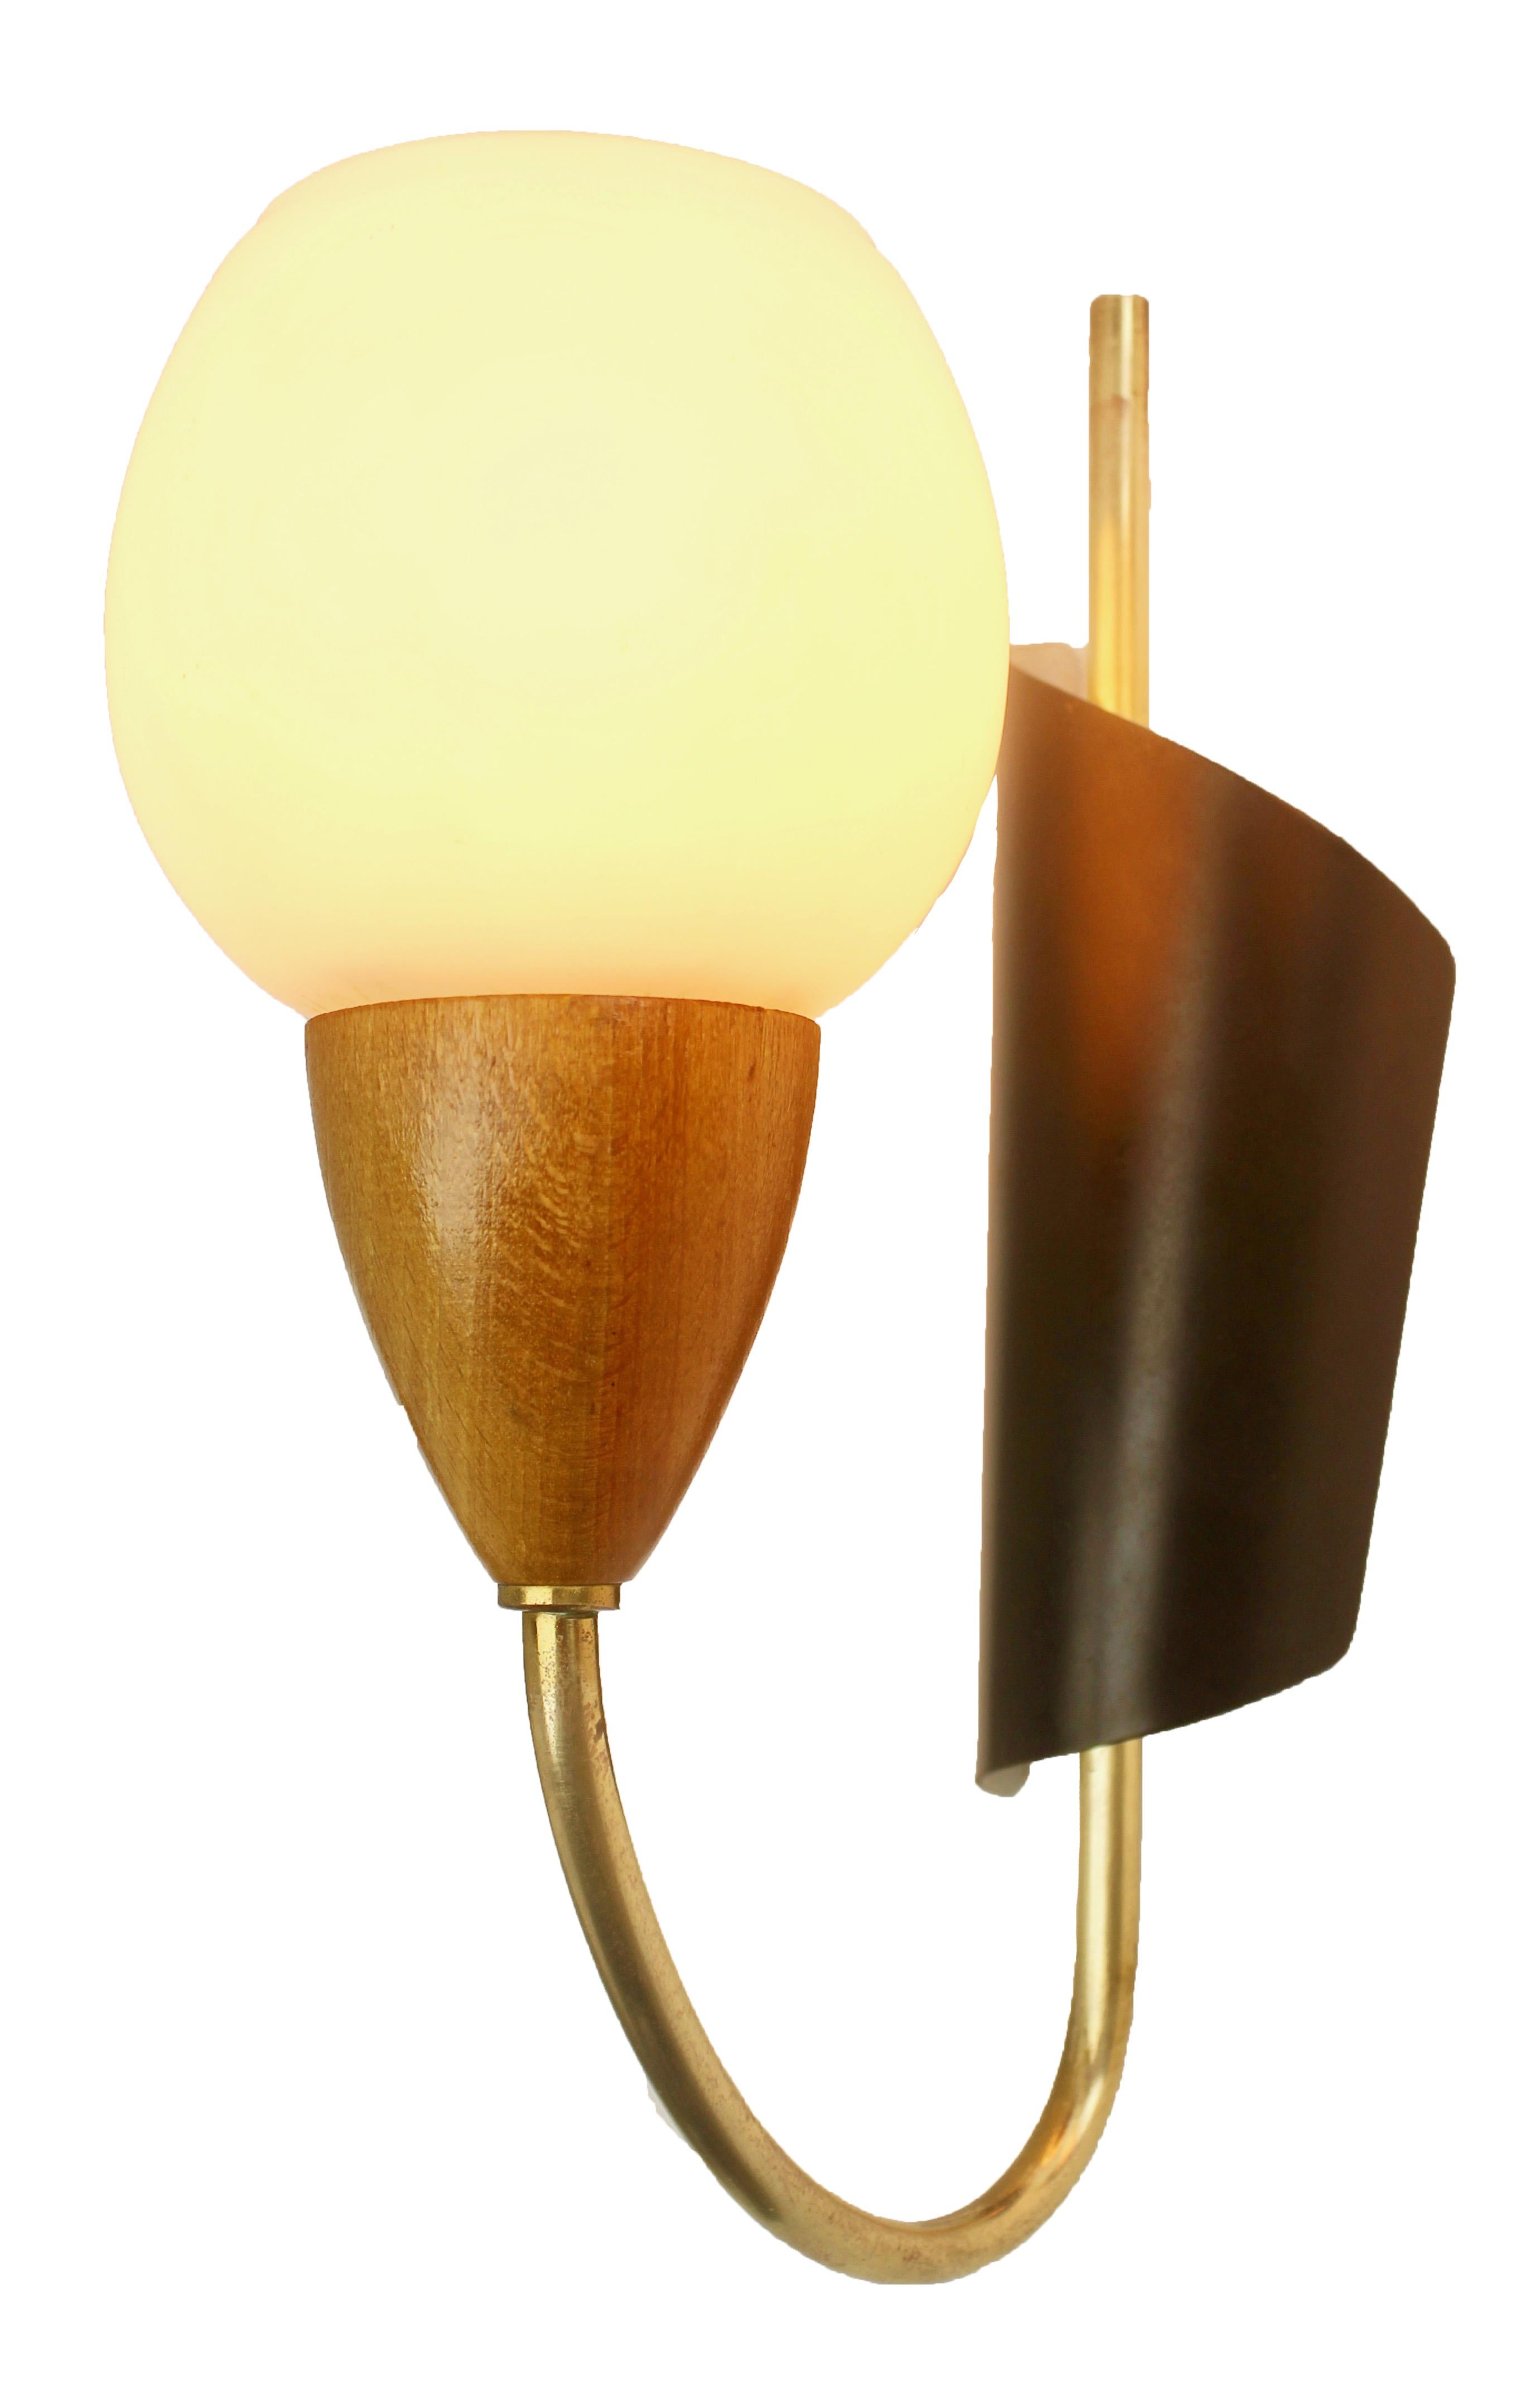 Hand-Crafted Vintage Pair of 1 Arms Wall Mount Lamps in the Style of Stilnovo, Italian, 1960s